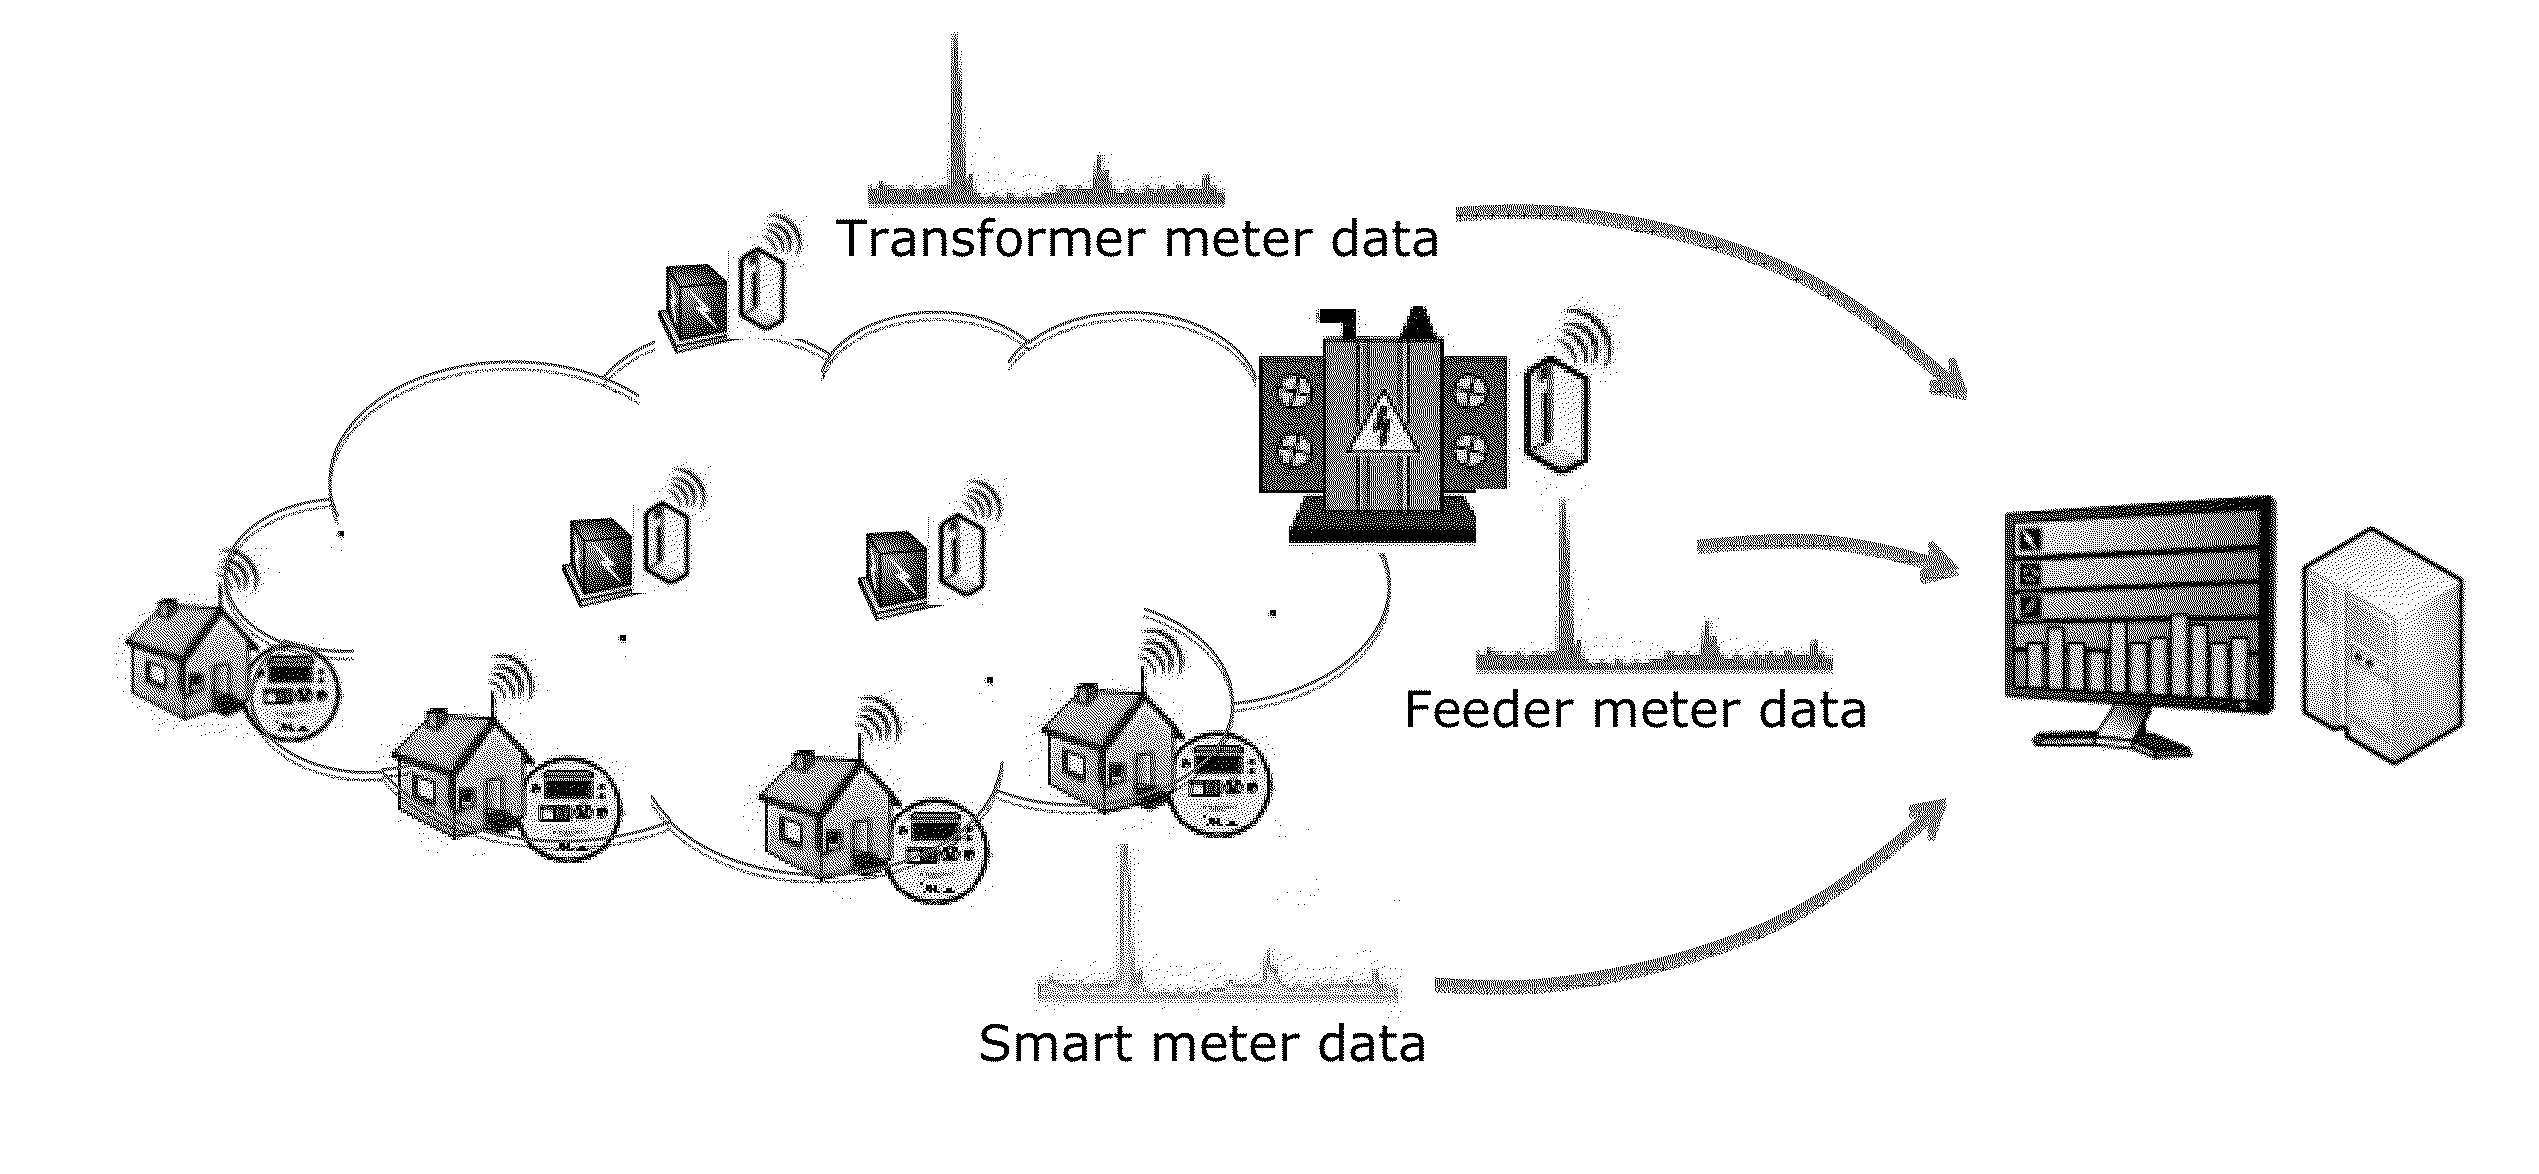 Determining a connectivity model in smart grids